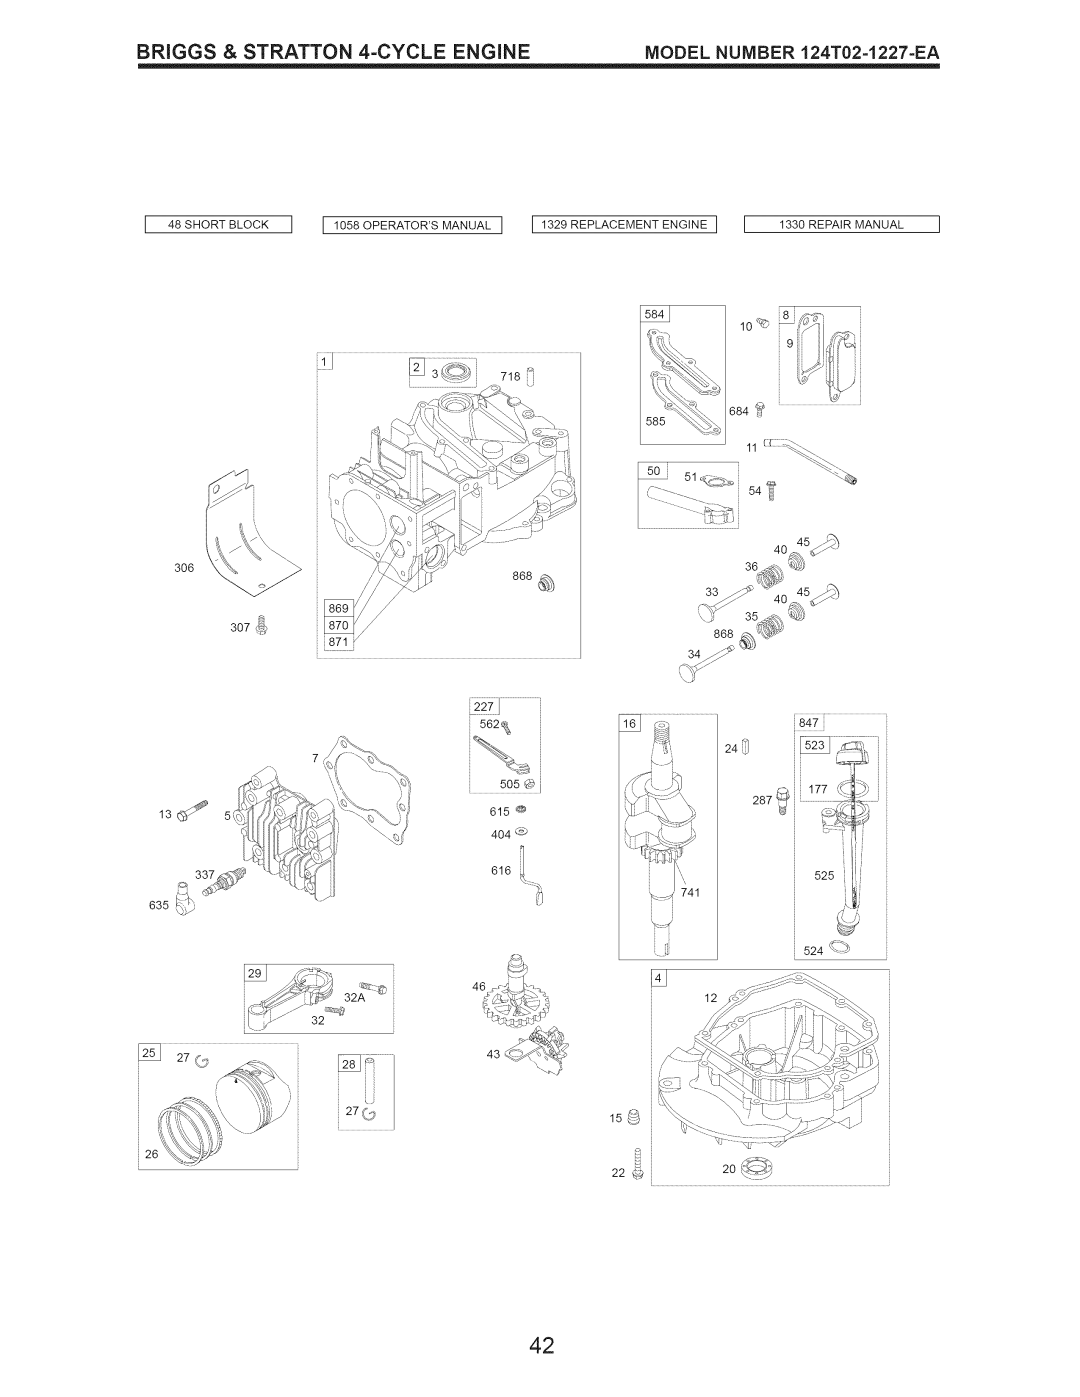 Craftsman 917.376231 owner manual 22_i 2o_, BRIGGS & STRATTON 4-CYCLEENGINE, MODEL NUMBER 124T02=1227=EA, 868 307_ 